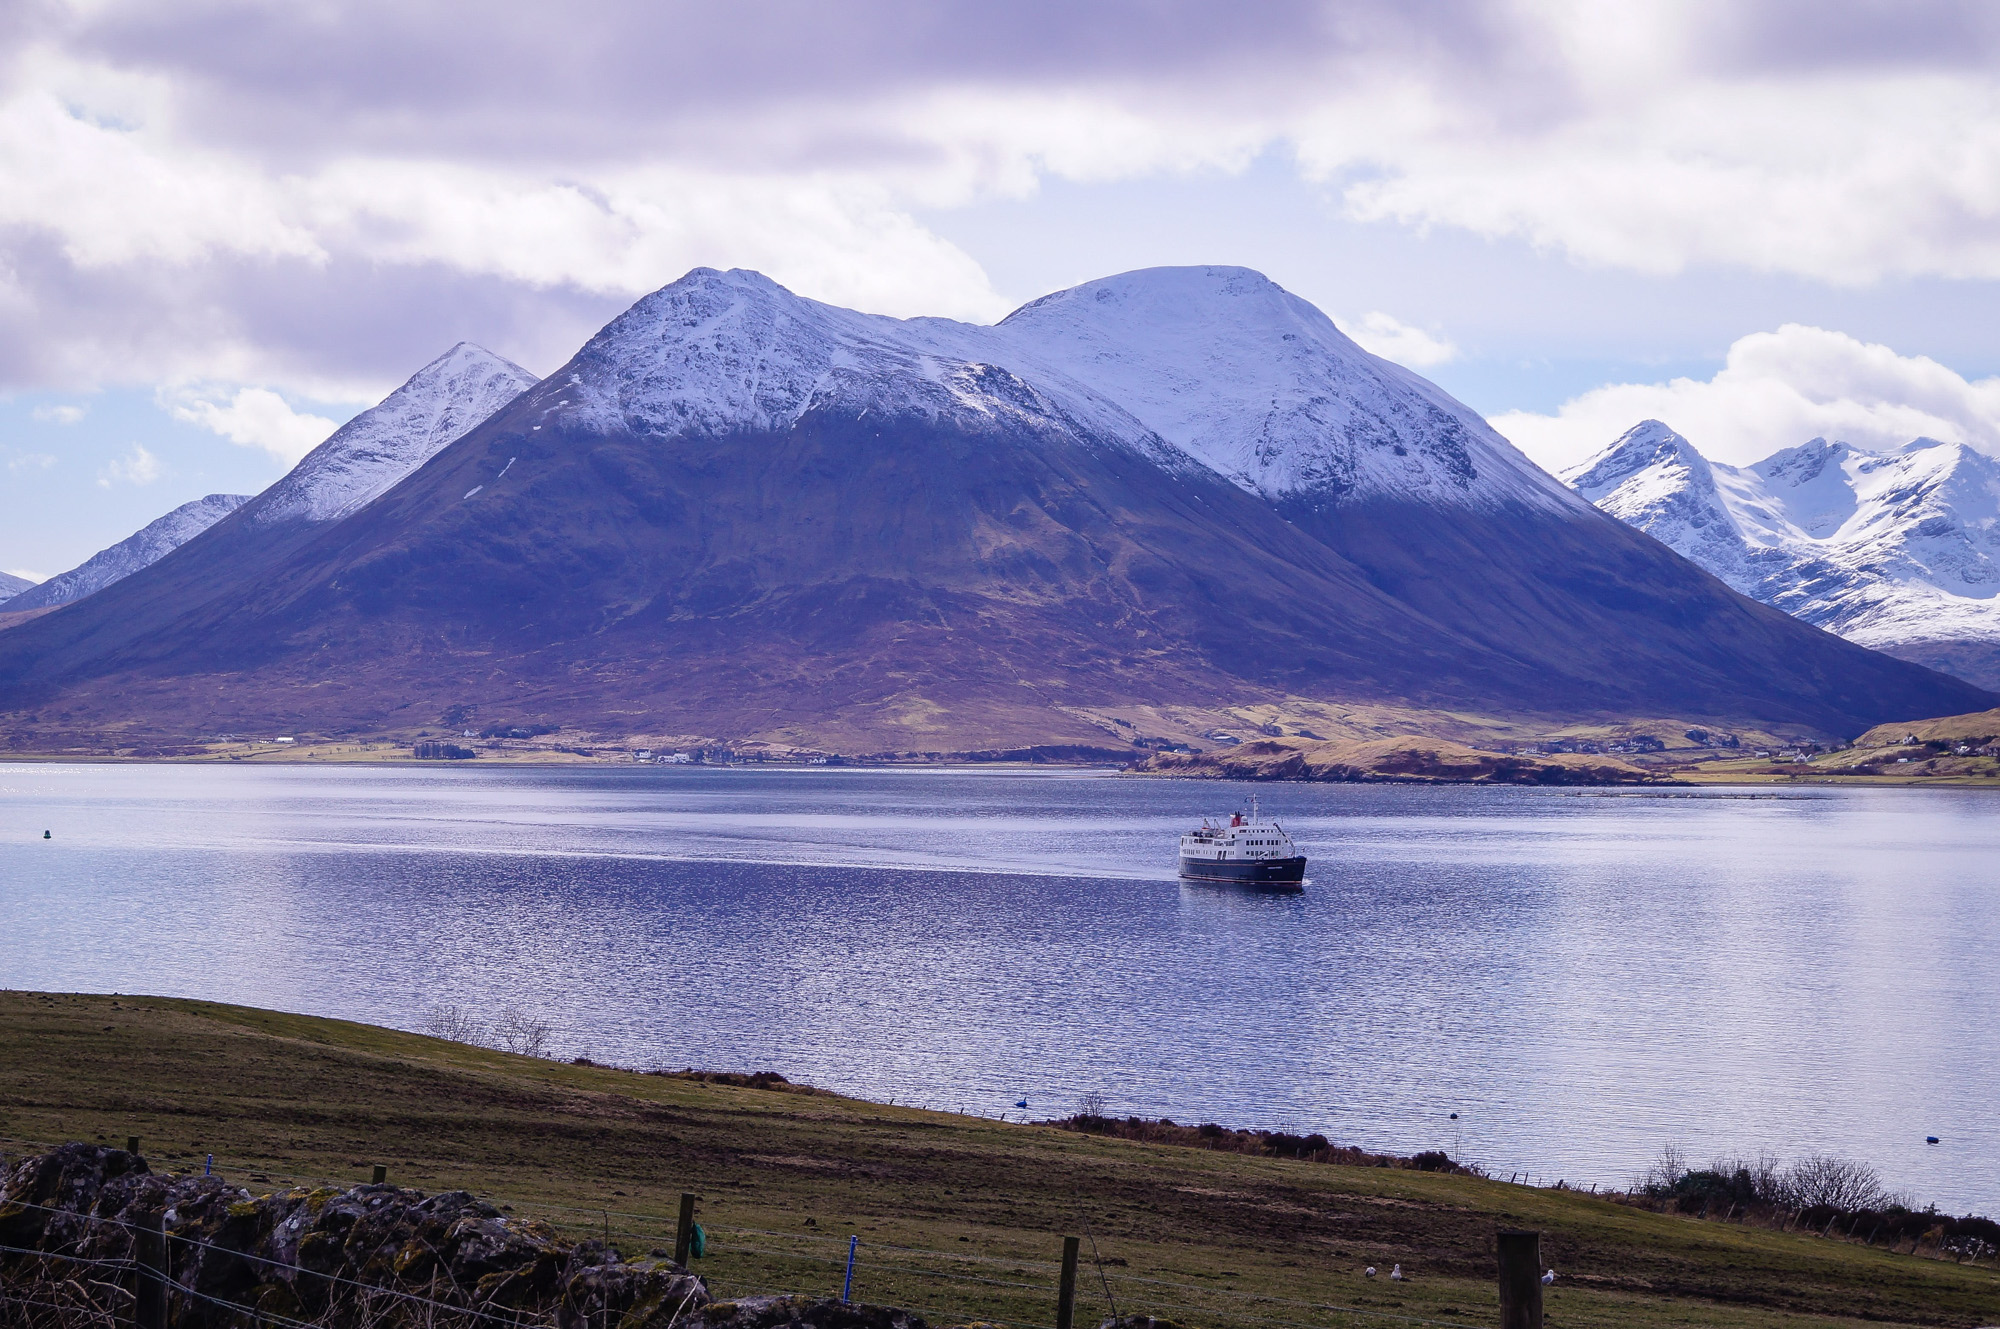 Views from the Isle of Raasay